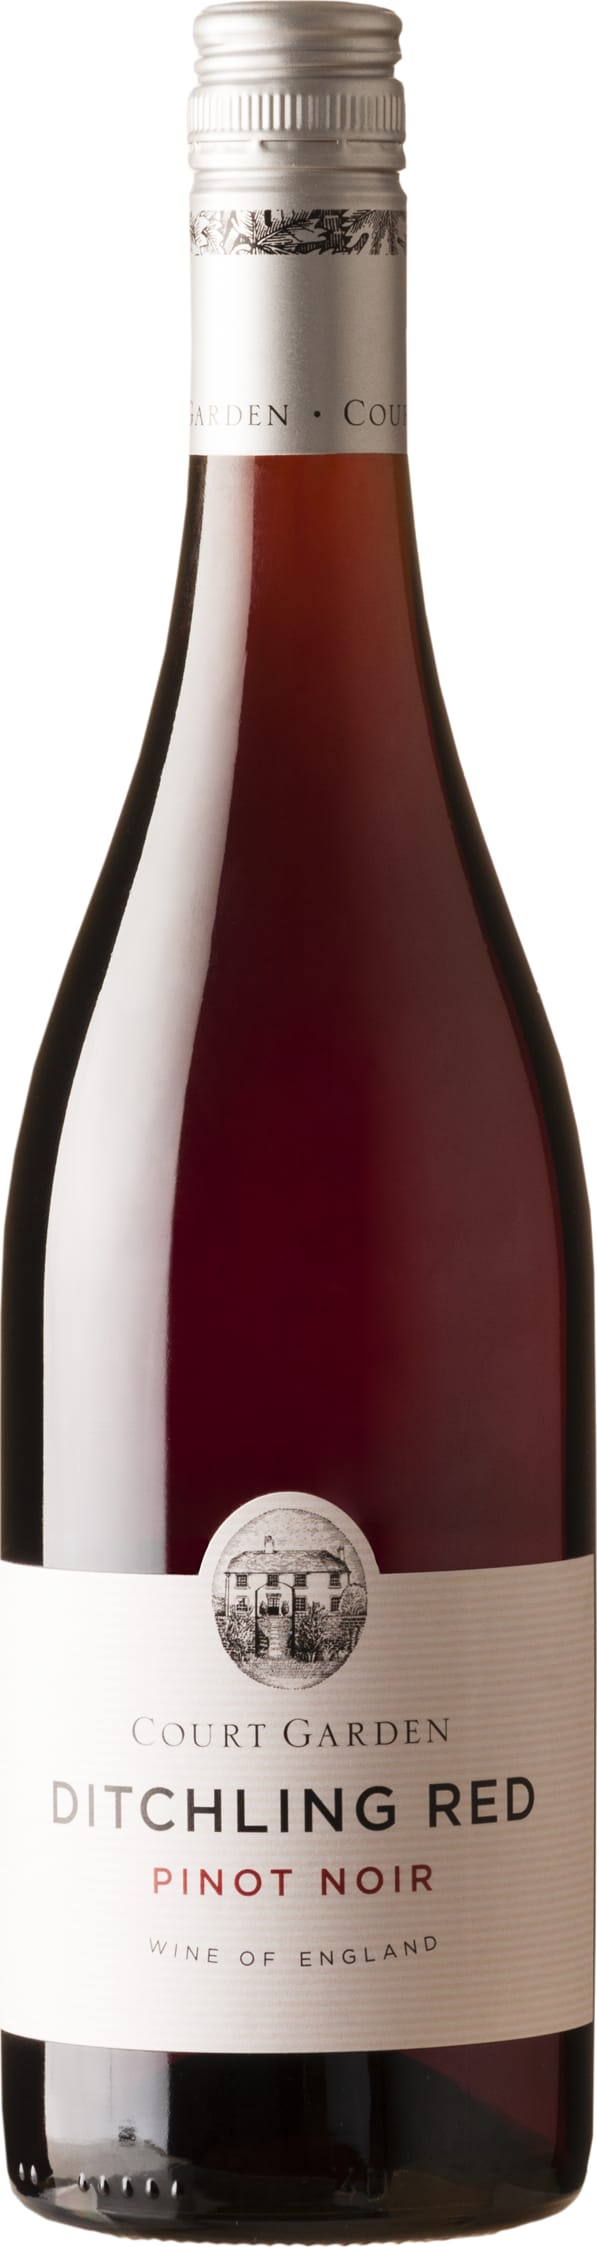 Ditchling Red 21 Court Garden 6x75cl - Just Wines 